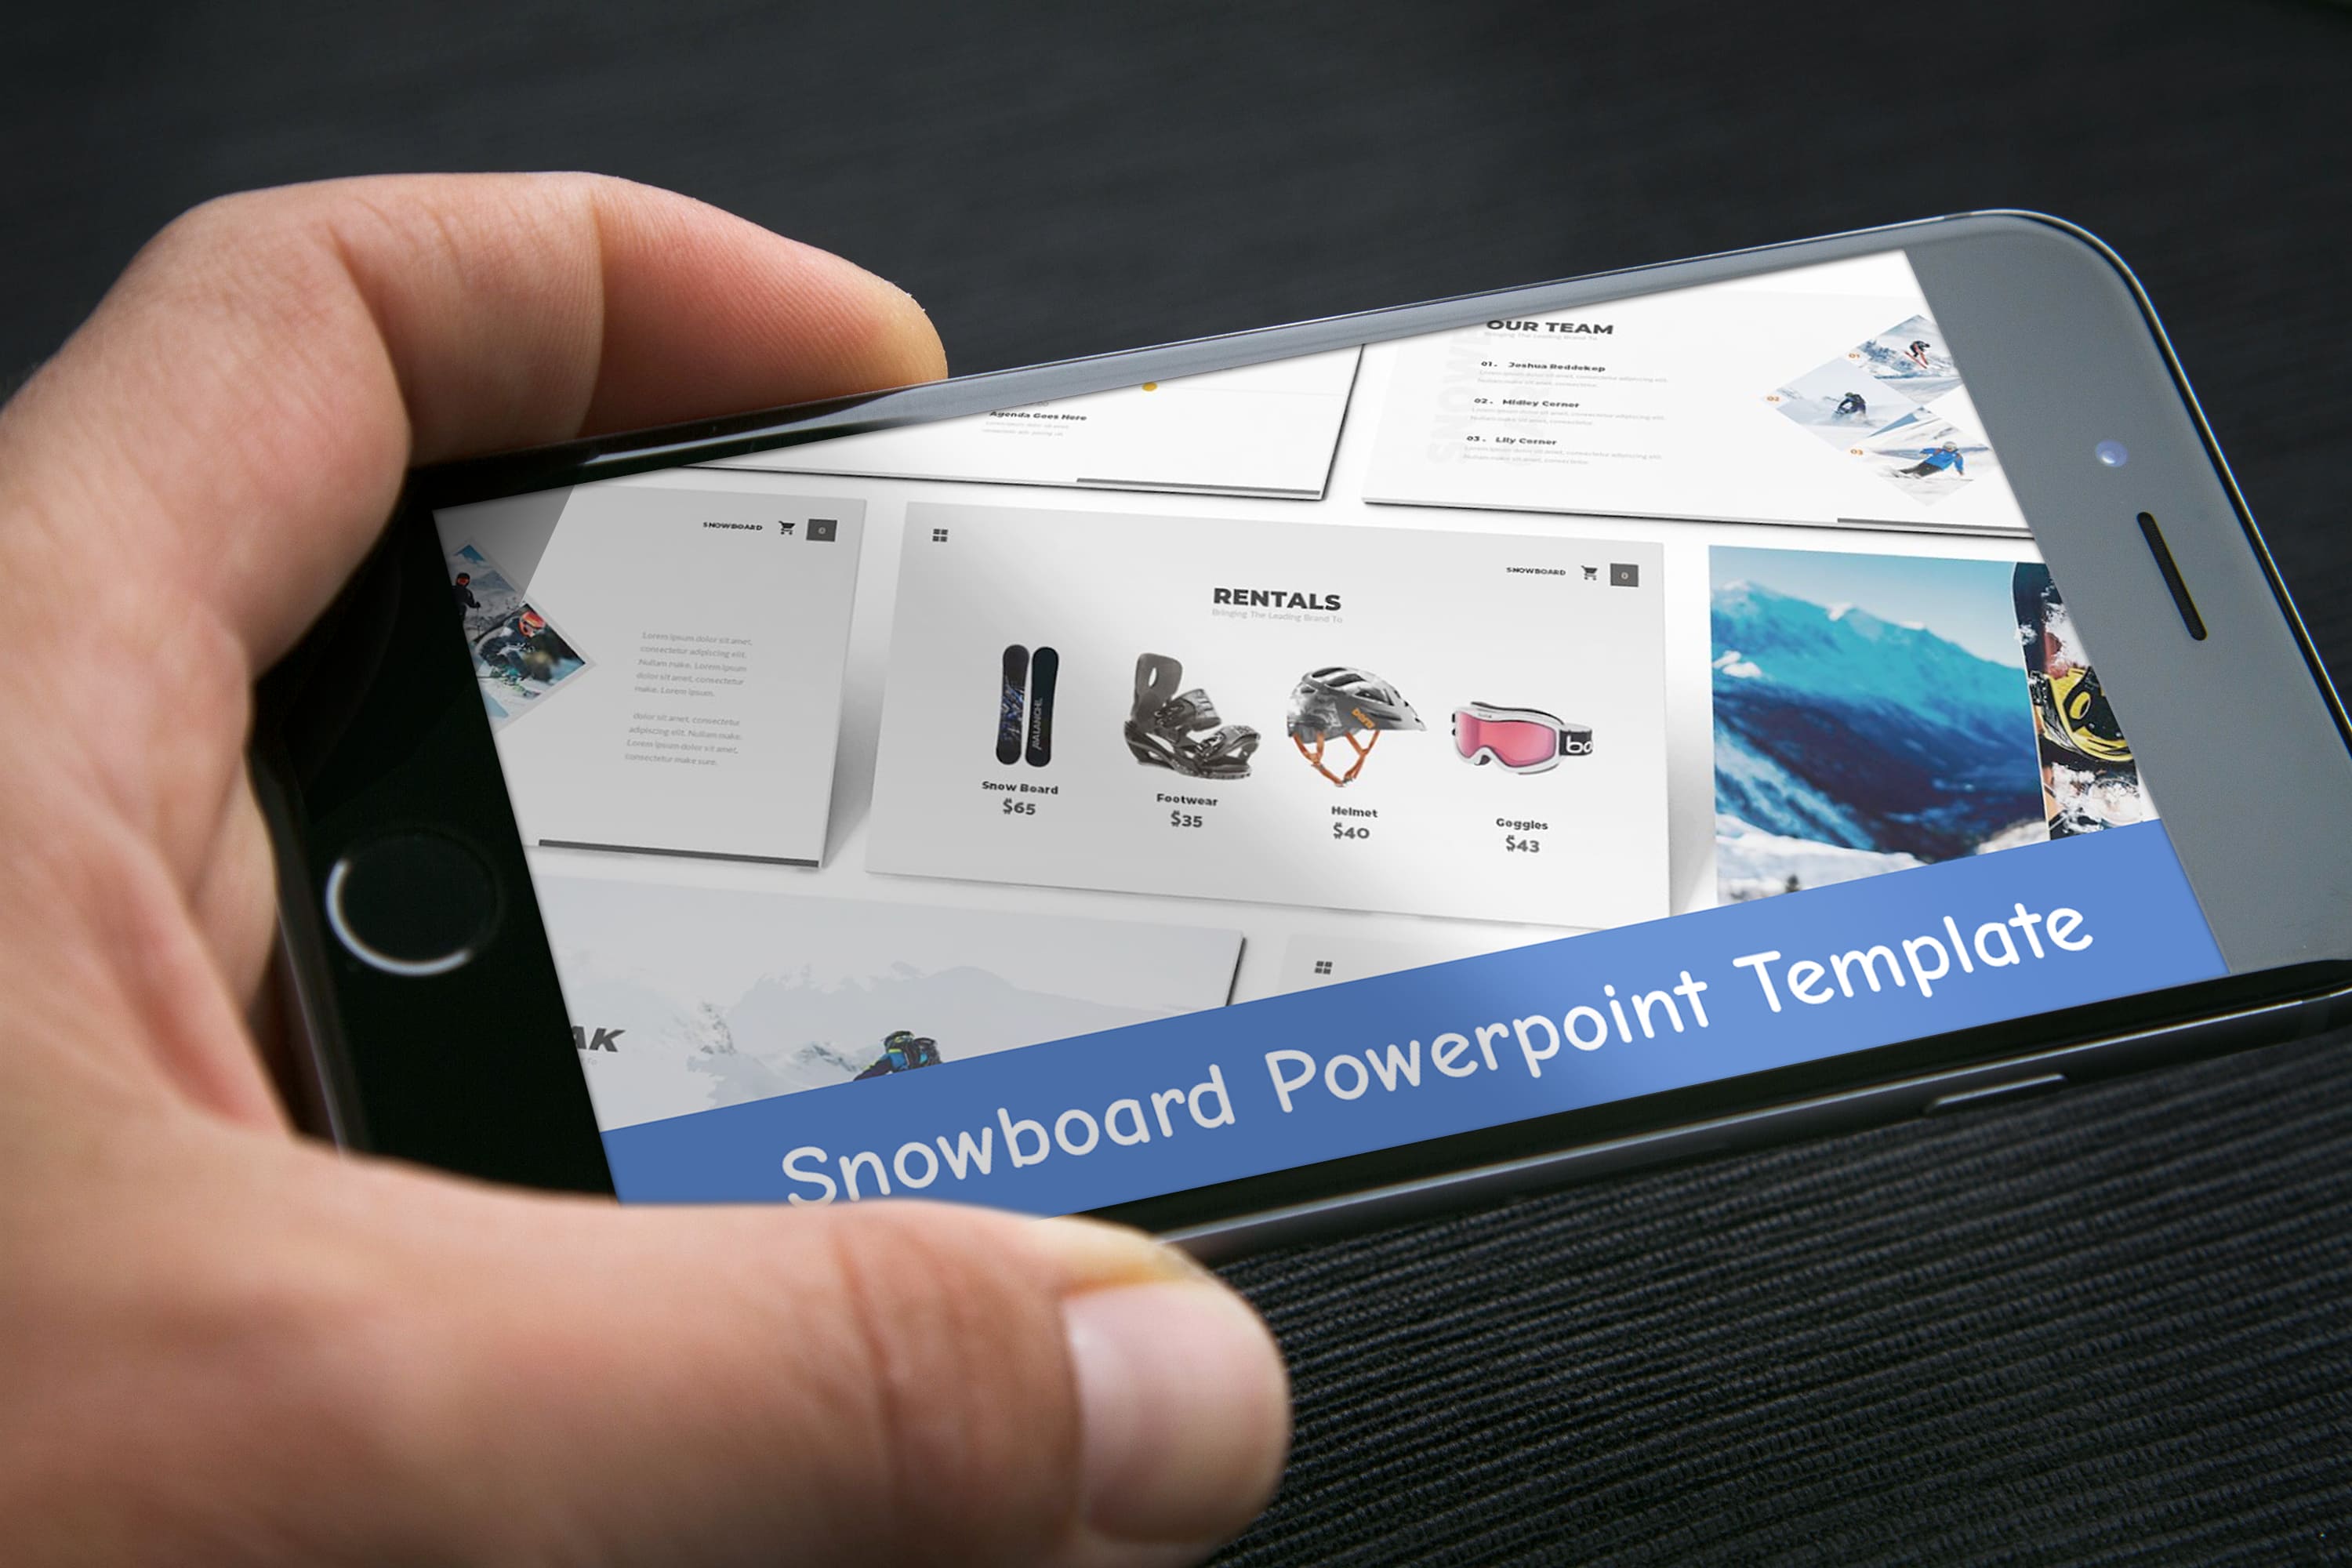 Snowboard Powerpoint Template - Mockup on Smartphone.